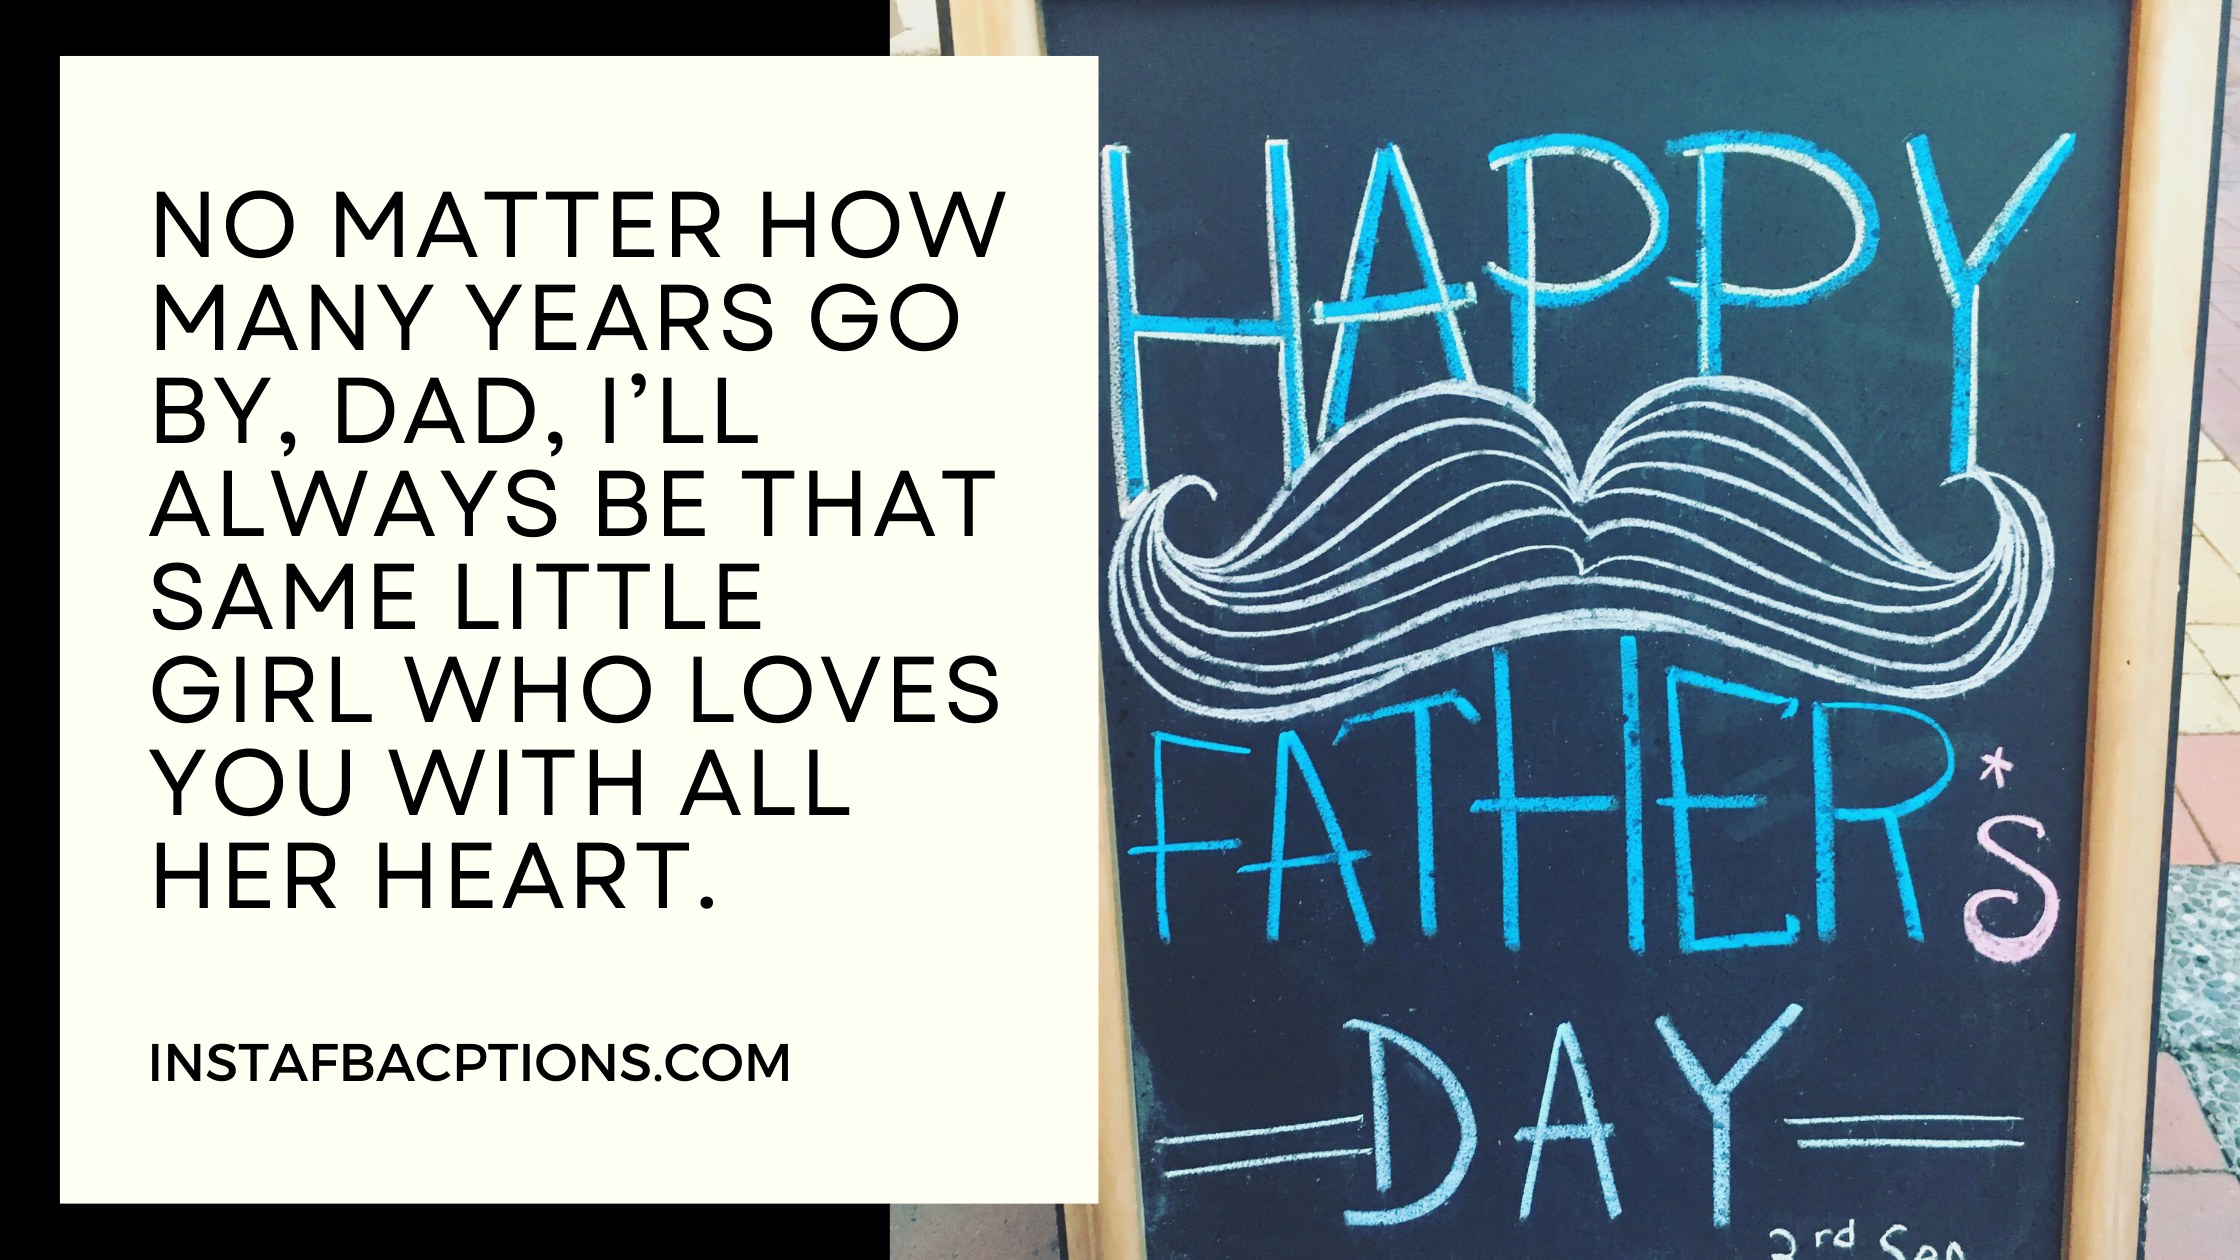 No matter how many years go by, Dad, I’ll always be that same little girl who loves you with all her heart  - Happy Fathers Day Captions 1 - Father&#8217;s Day Quotes for Instagram in 2023